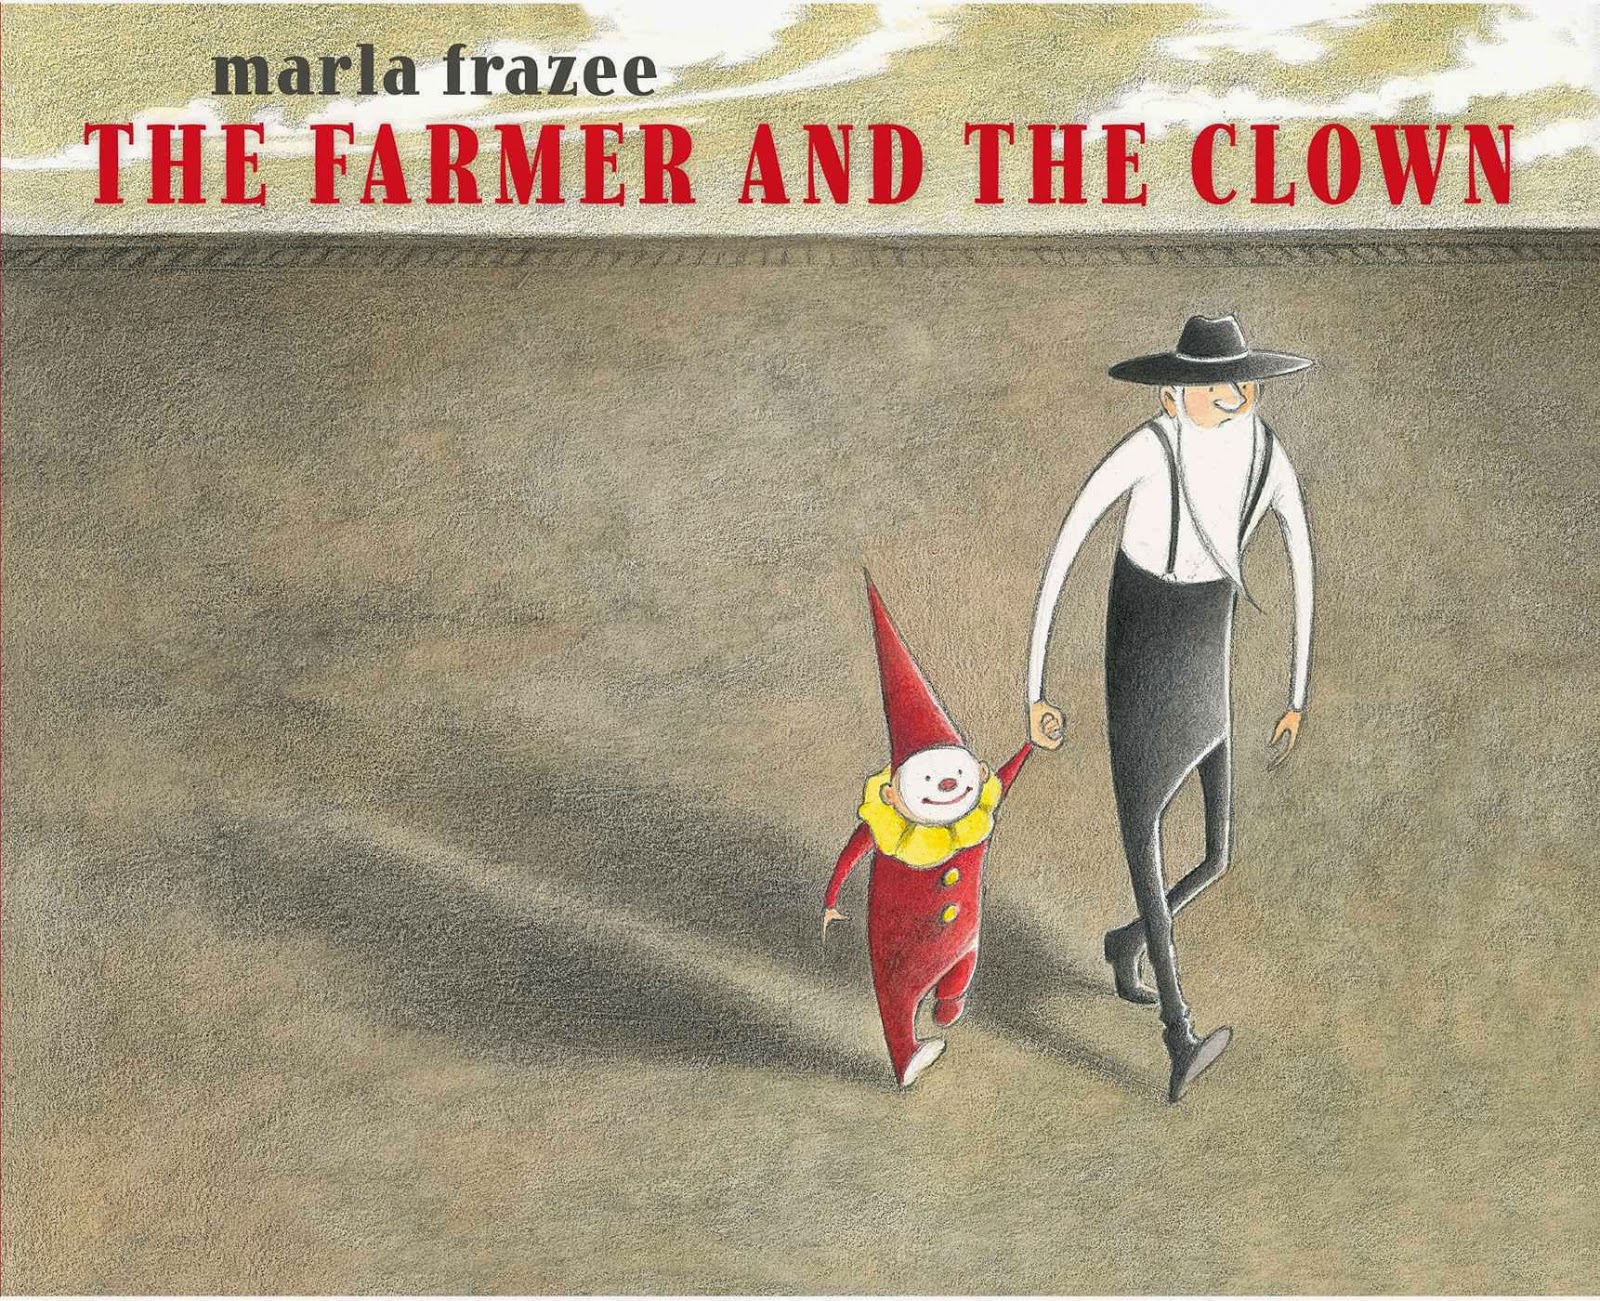 Children's Atheneum: The Farmer and the Clown by Marla Frazee Book ...